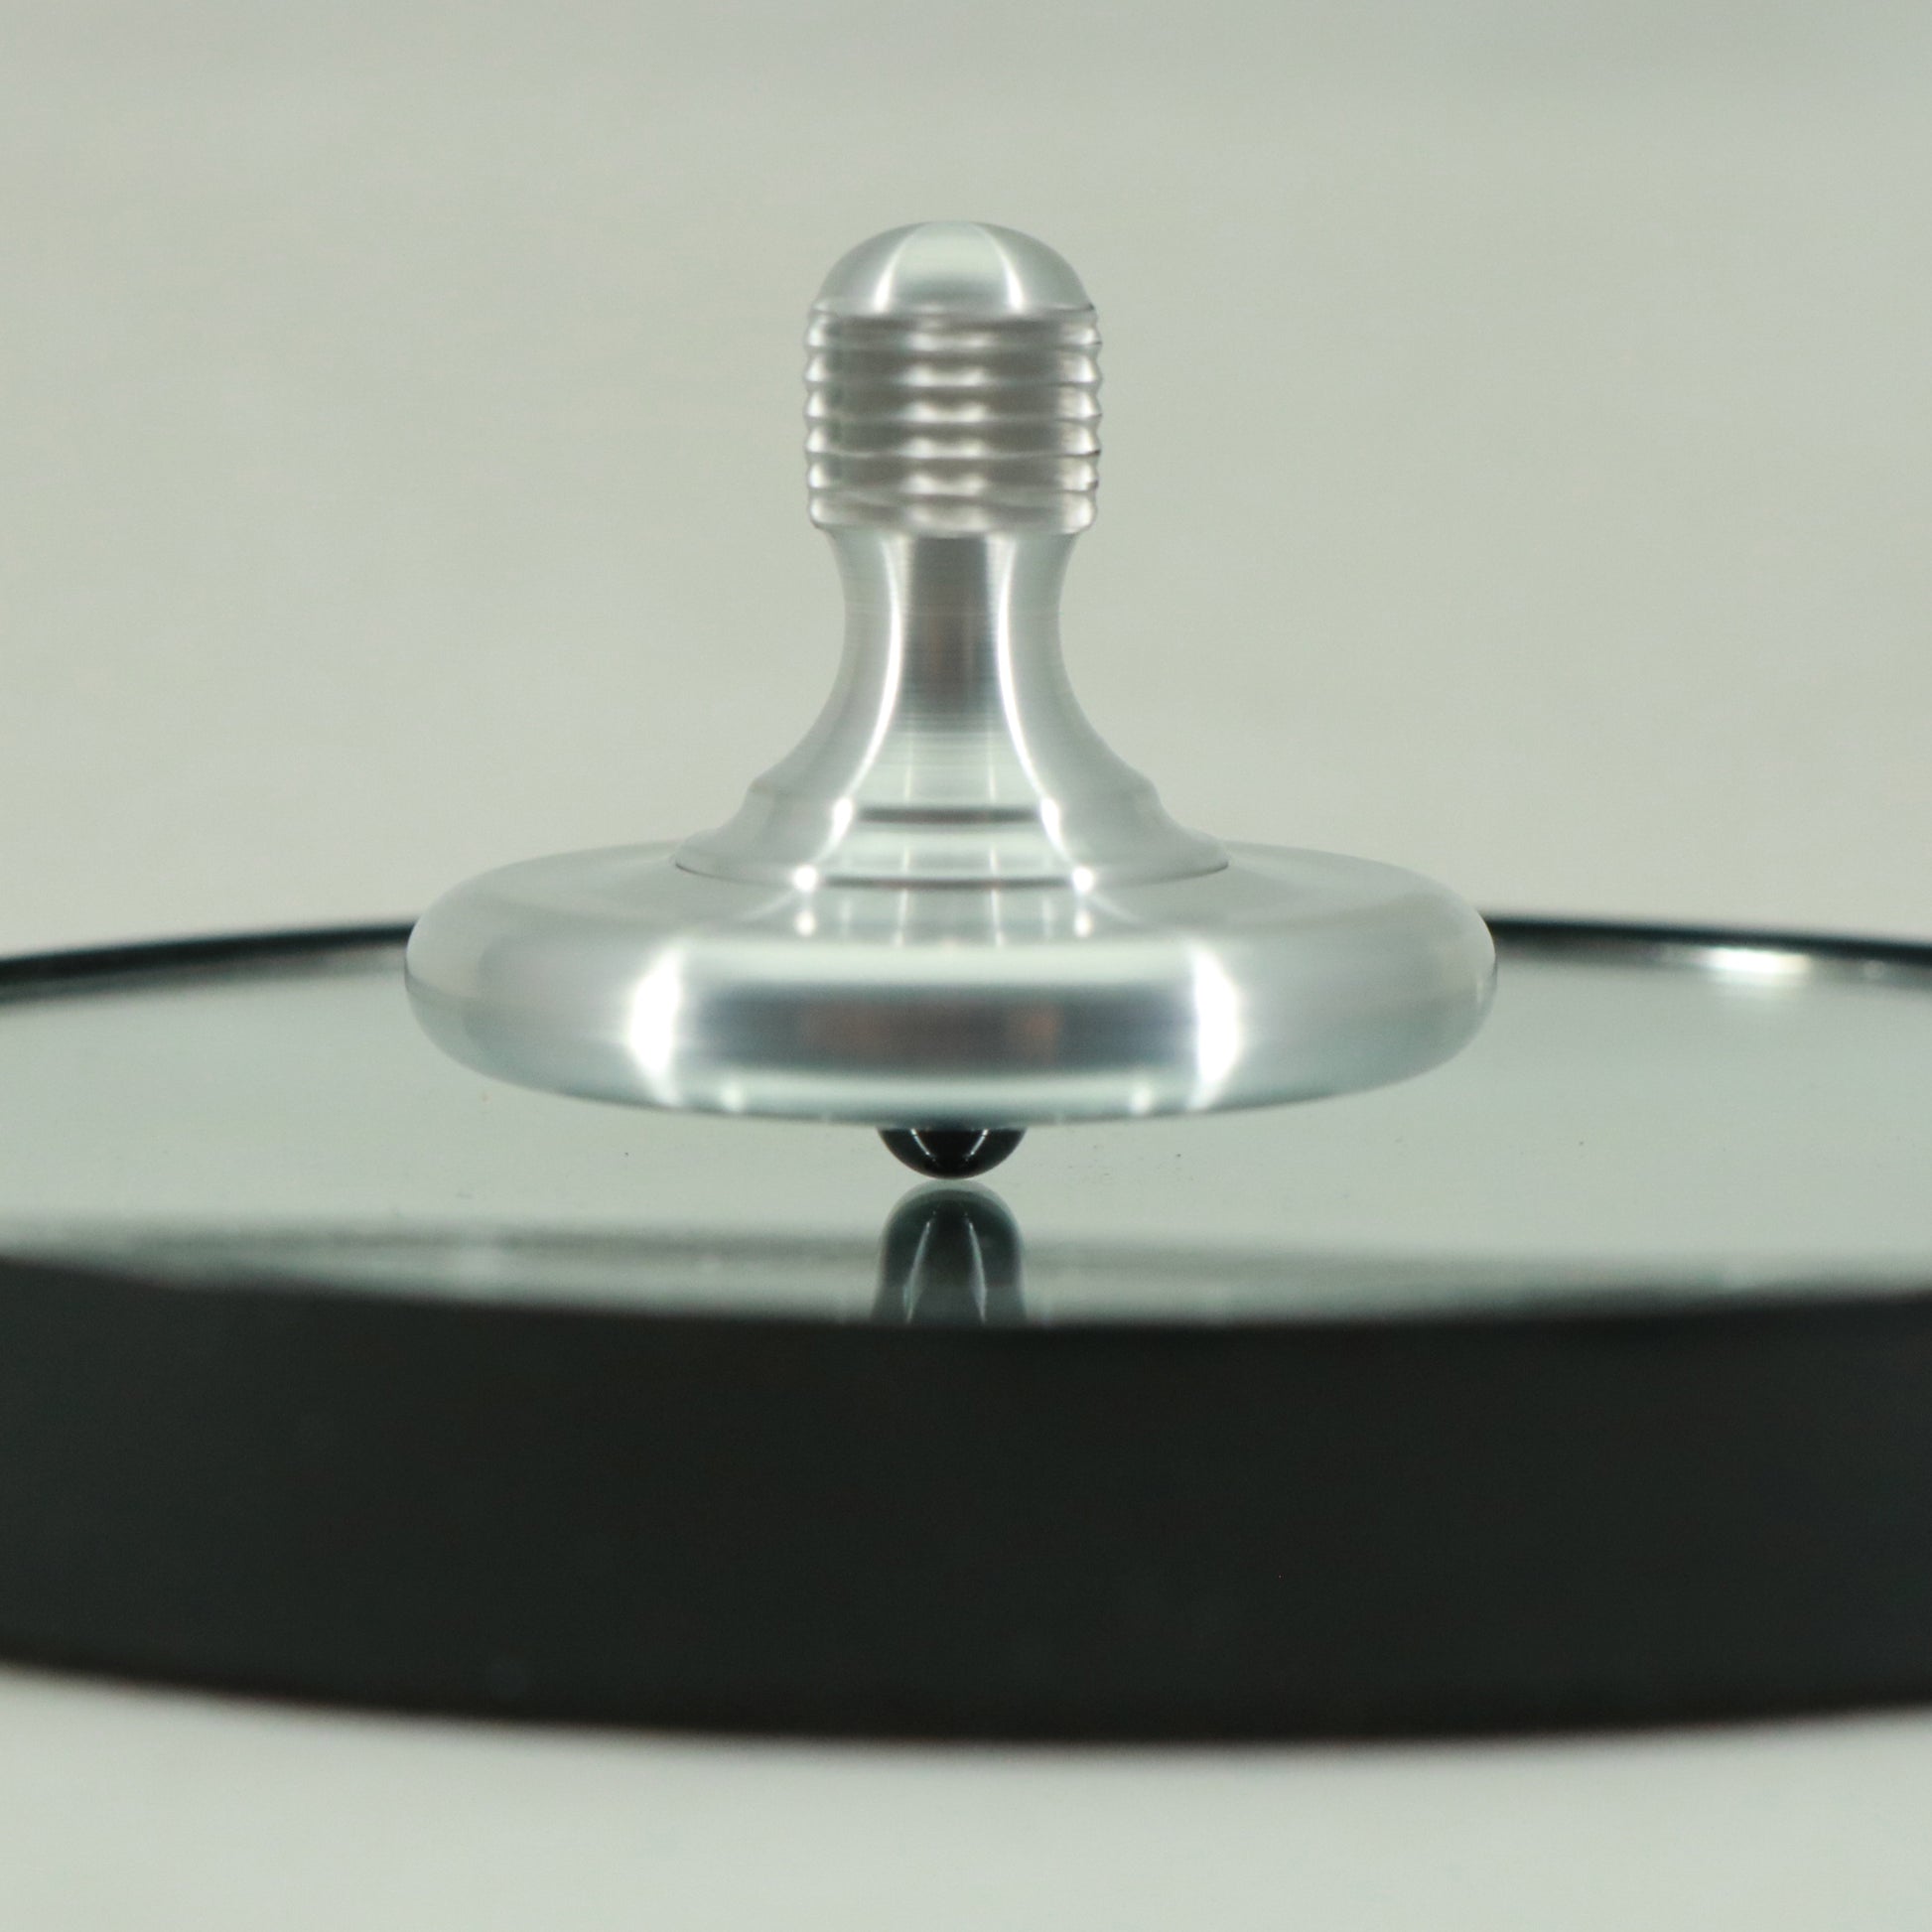 The M3 precision metal spinning top by Kemner Design shown here in brushed aluminum